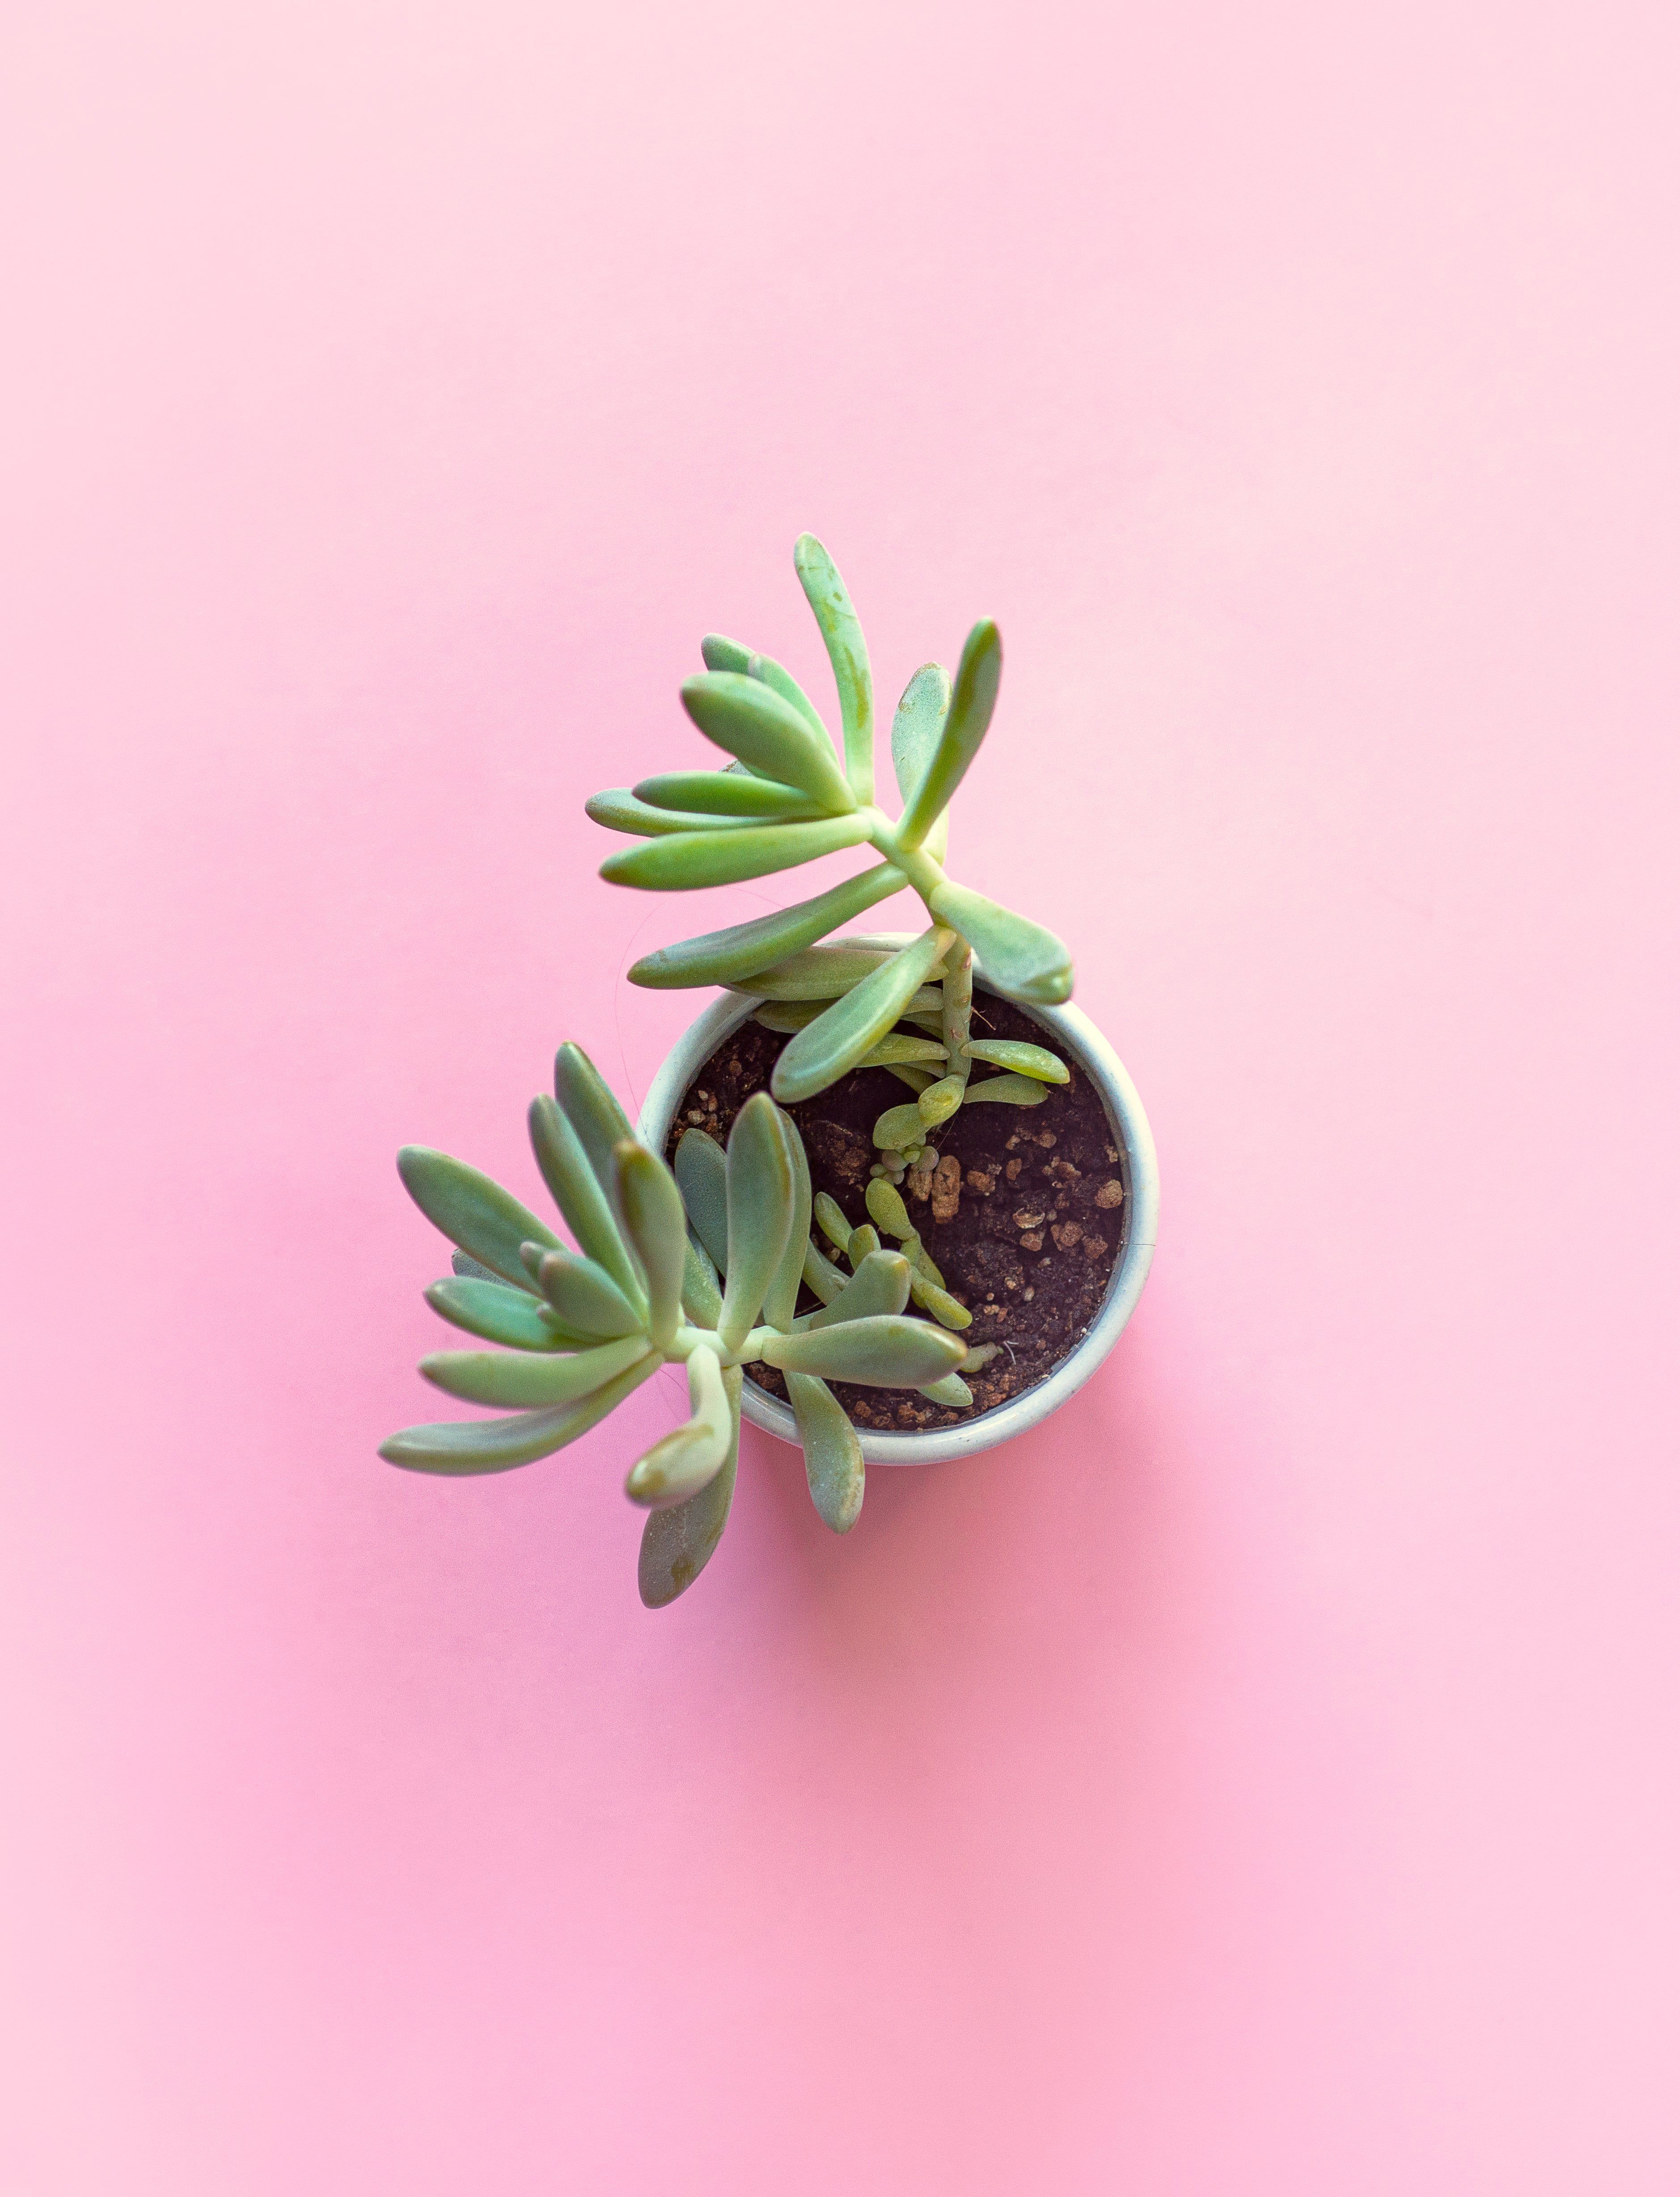 Browse Free HD Image of Potted Succulent On Pink Background